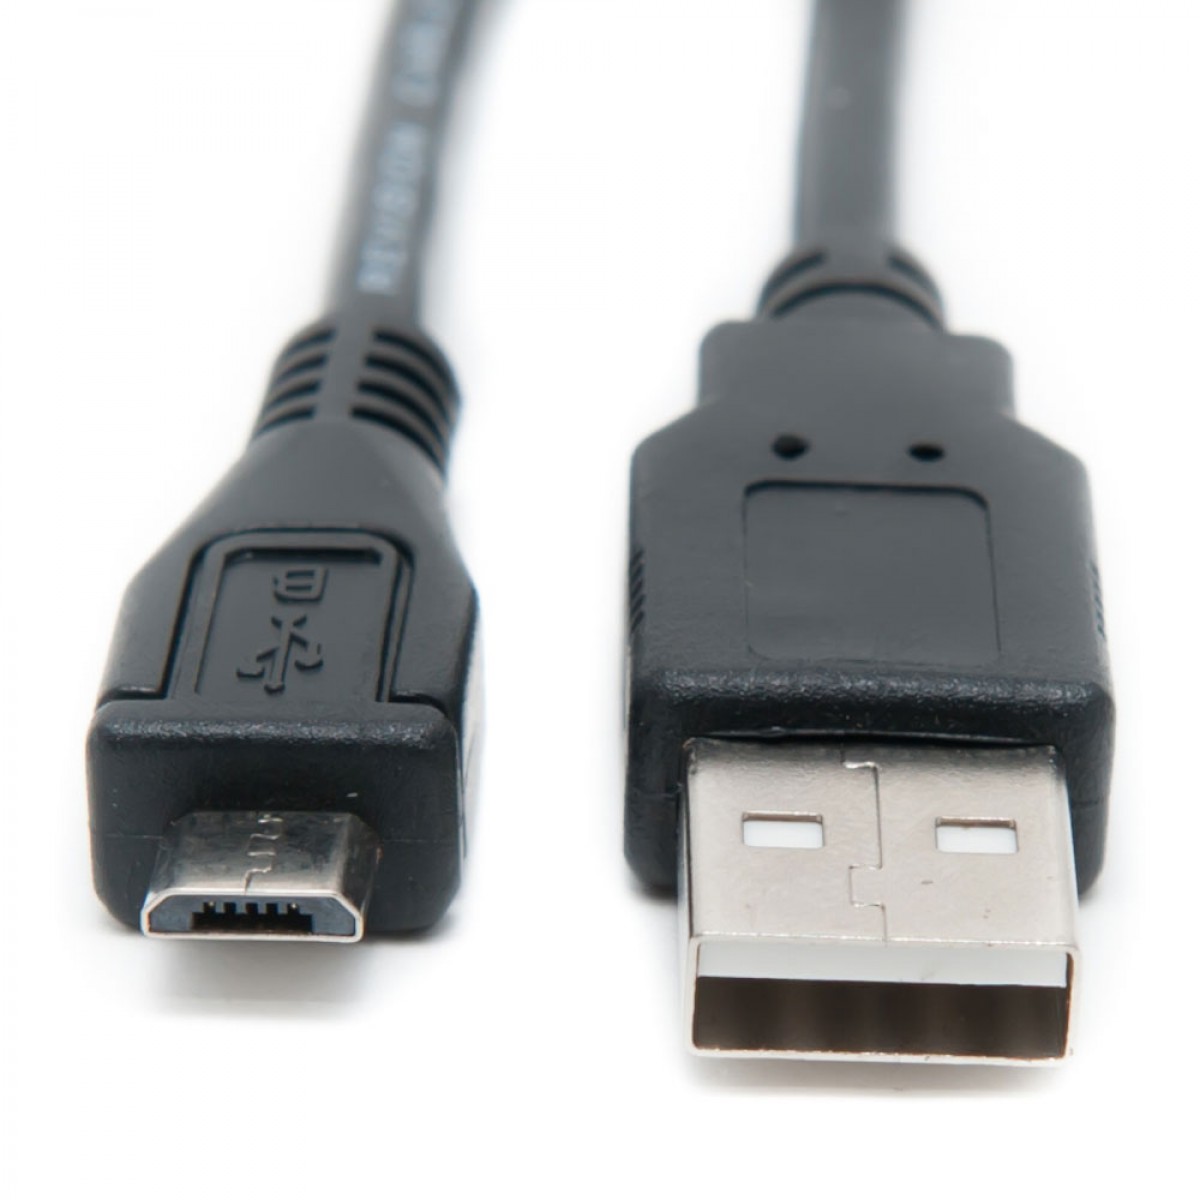 PRO OTG Power Cable Works for Alcatel OneTouch 3075 with Power Connect to Any Compatible USB Accessory with MicroUSB 